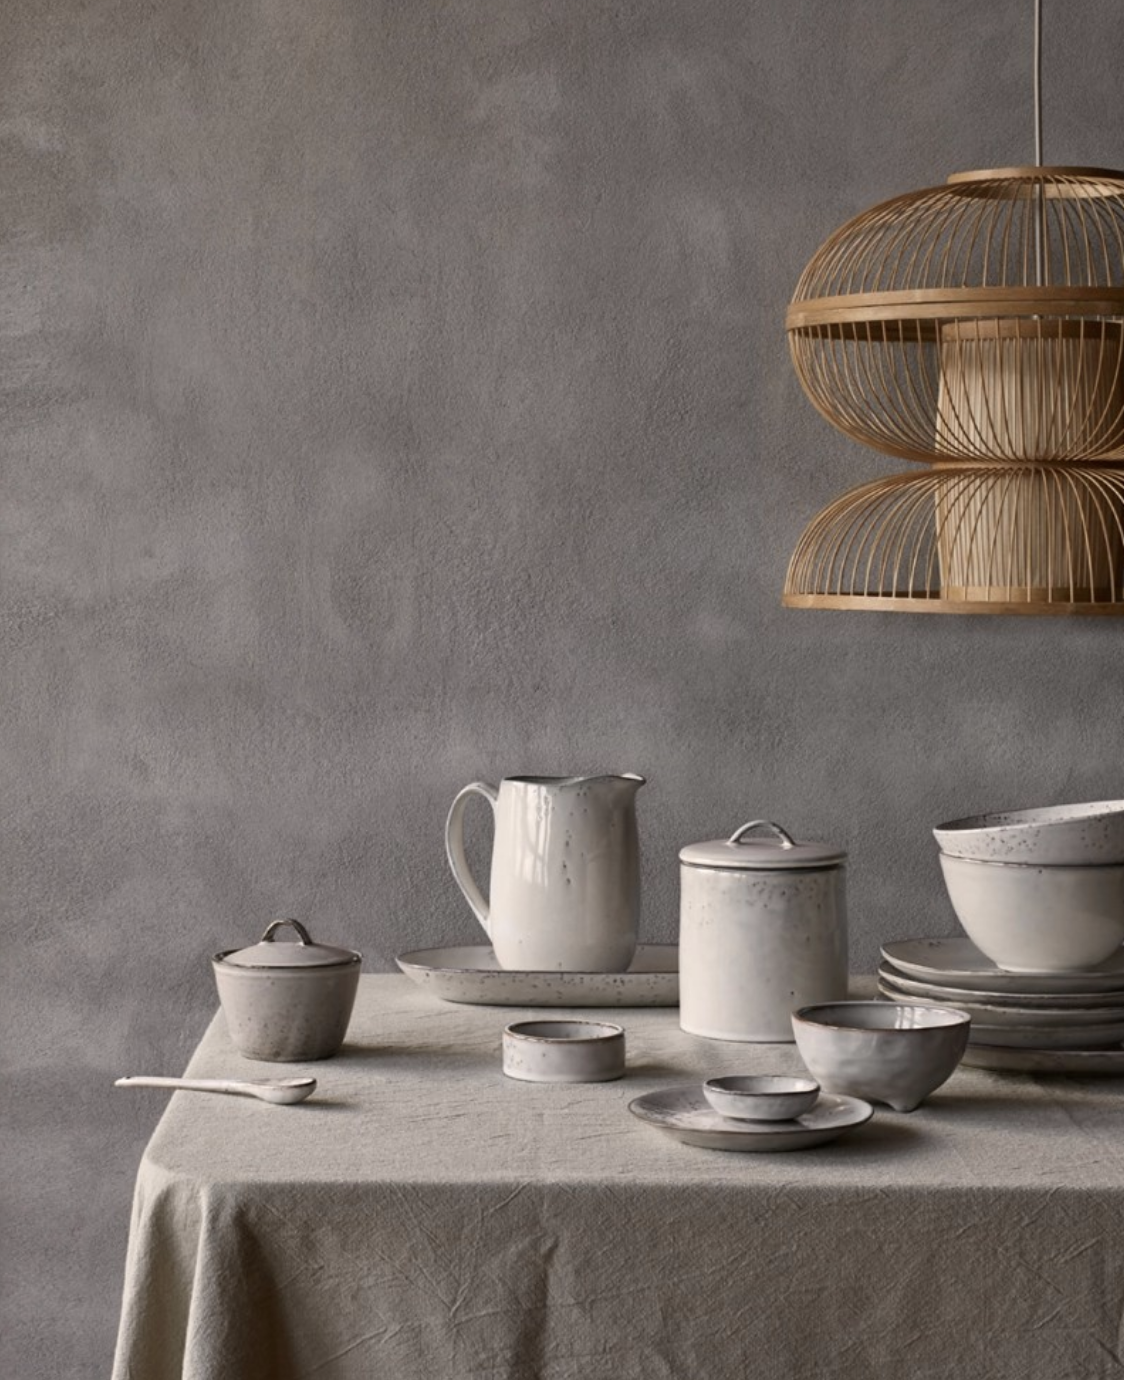   Large Milk Jug,   Oval Plate  ,  Little Bowl,   Jar with lid,   Sugar Bowl ,  Bowl on small feet ,  Lunch Plate ,  Bowls , all the tableware is from the  Nordic Sand Collection  created by  Broste Copenhagen.   